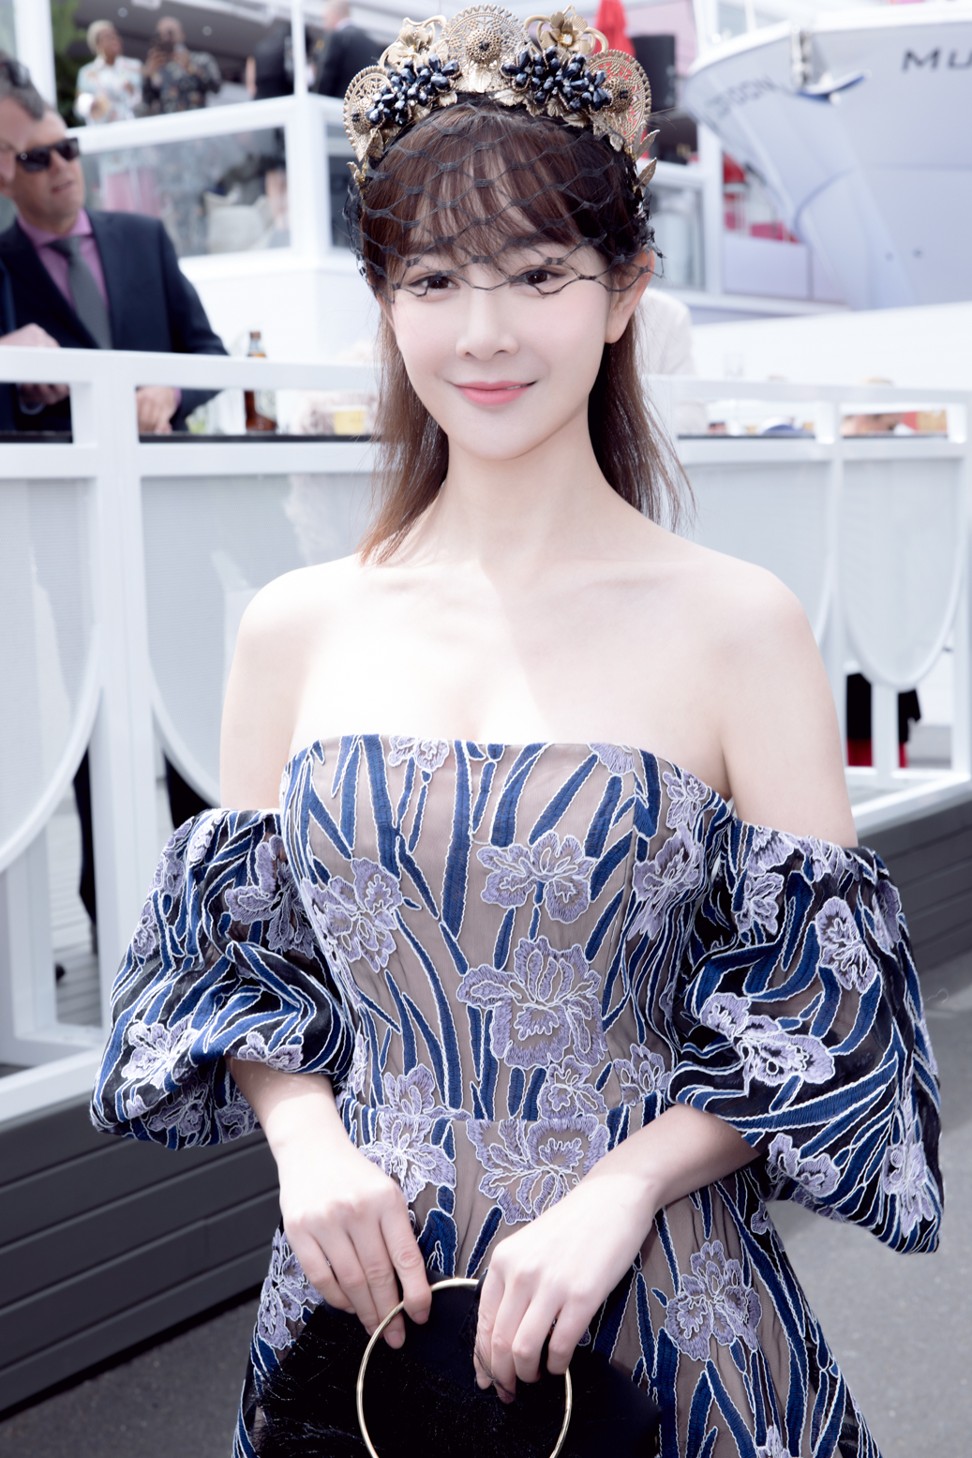 Zhang wears an off-the-shoulder embroidered Elliatt dress at the Spring Racing Carnival in Melbourne.